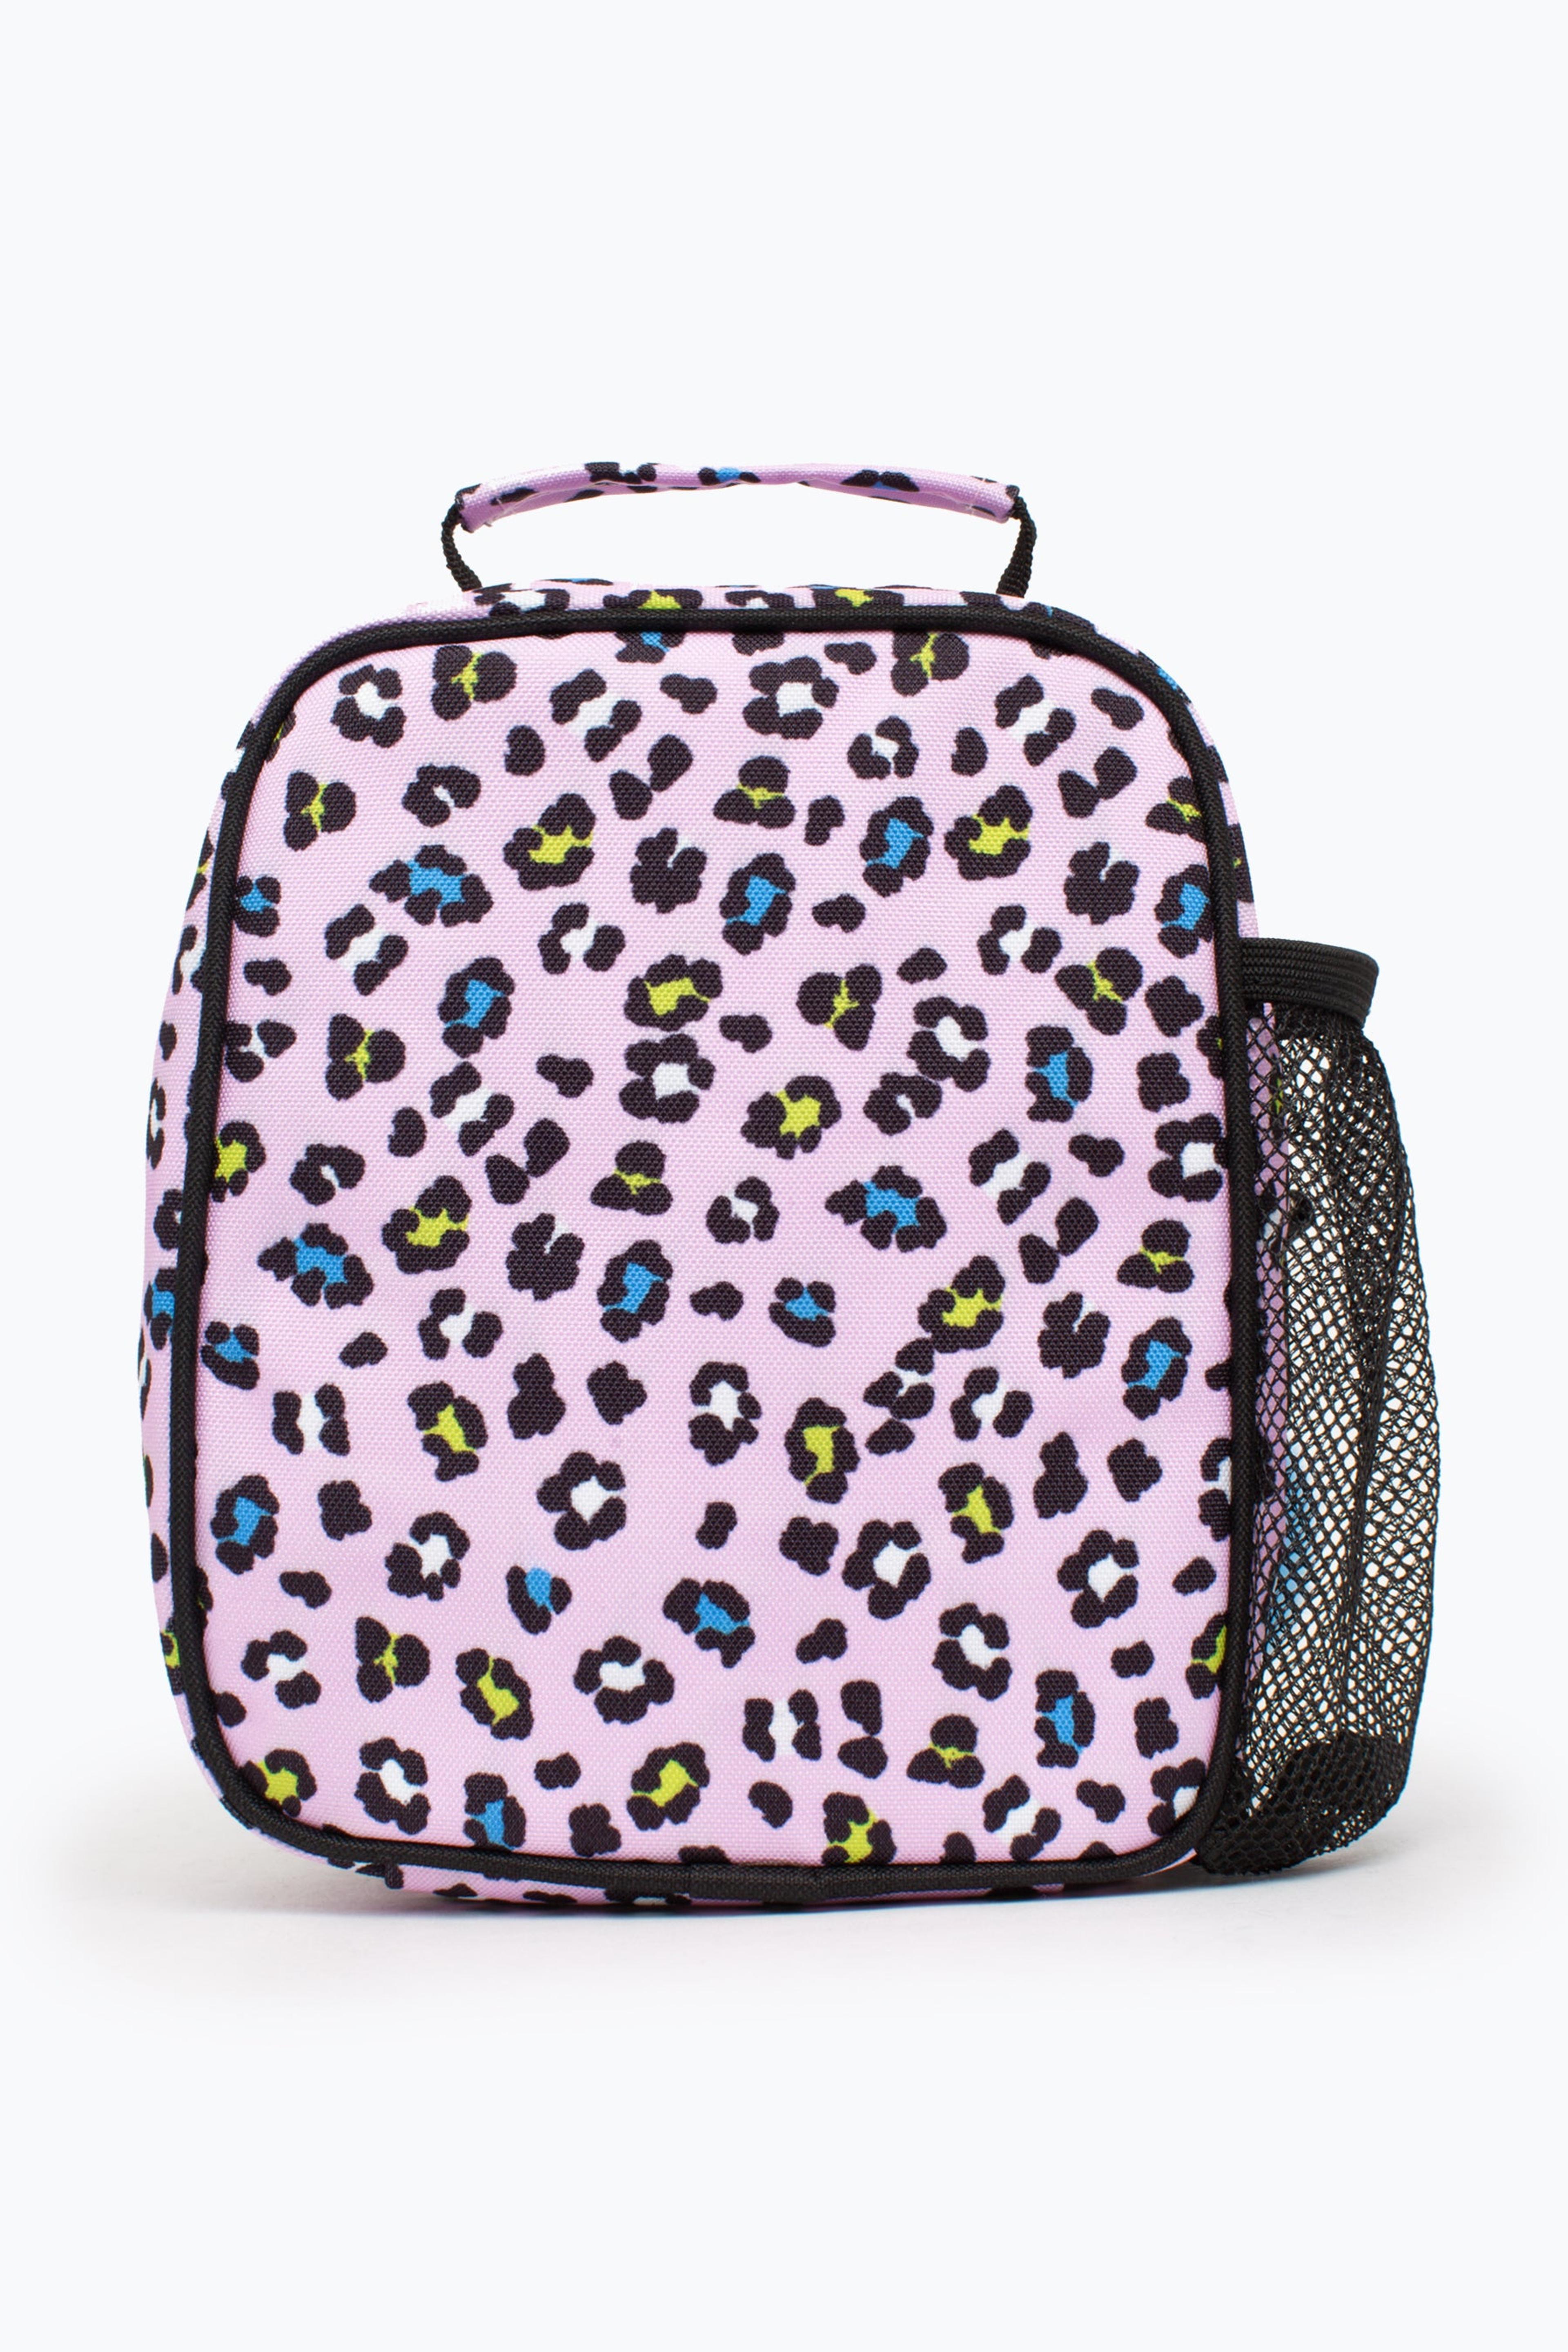 Alternate View 2 of HYPE LILAC LEOPARD LUNCH BOX